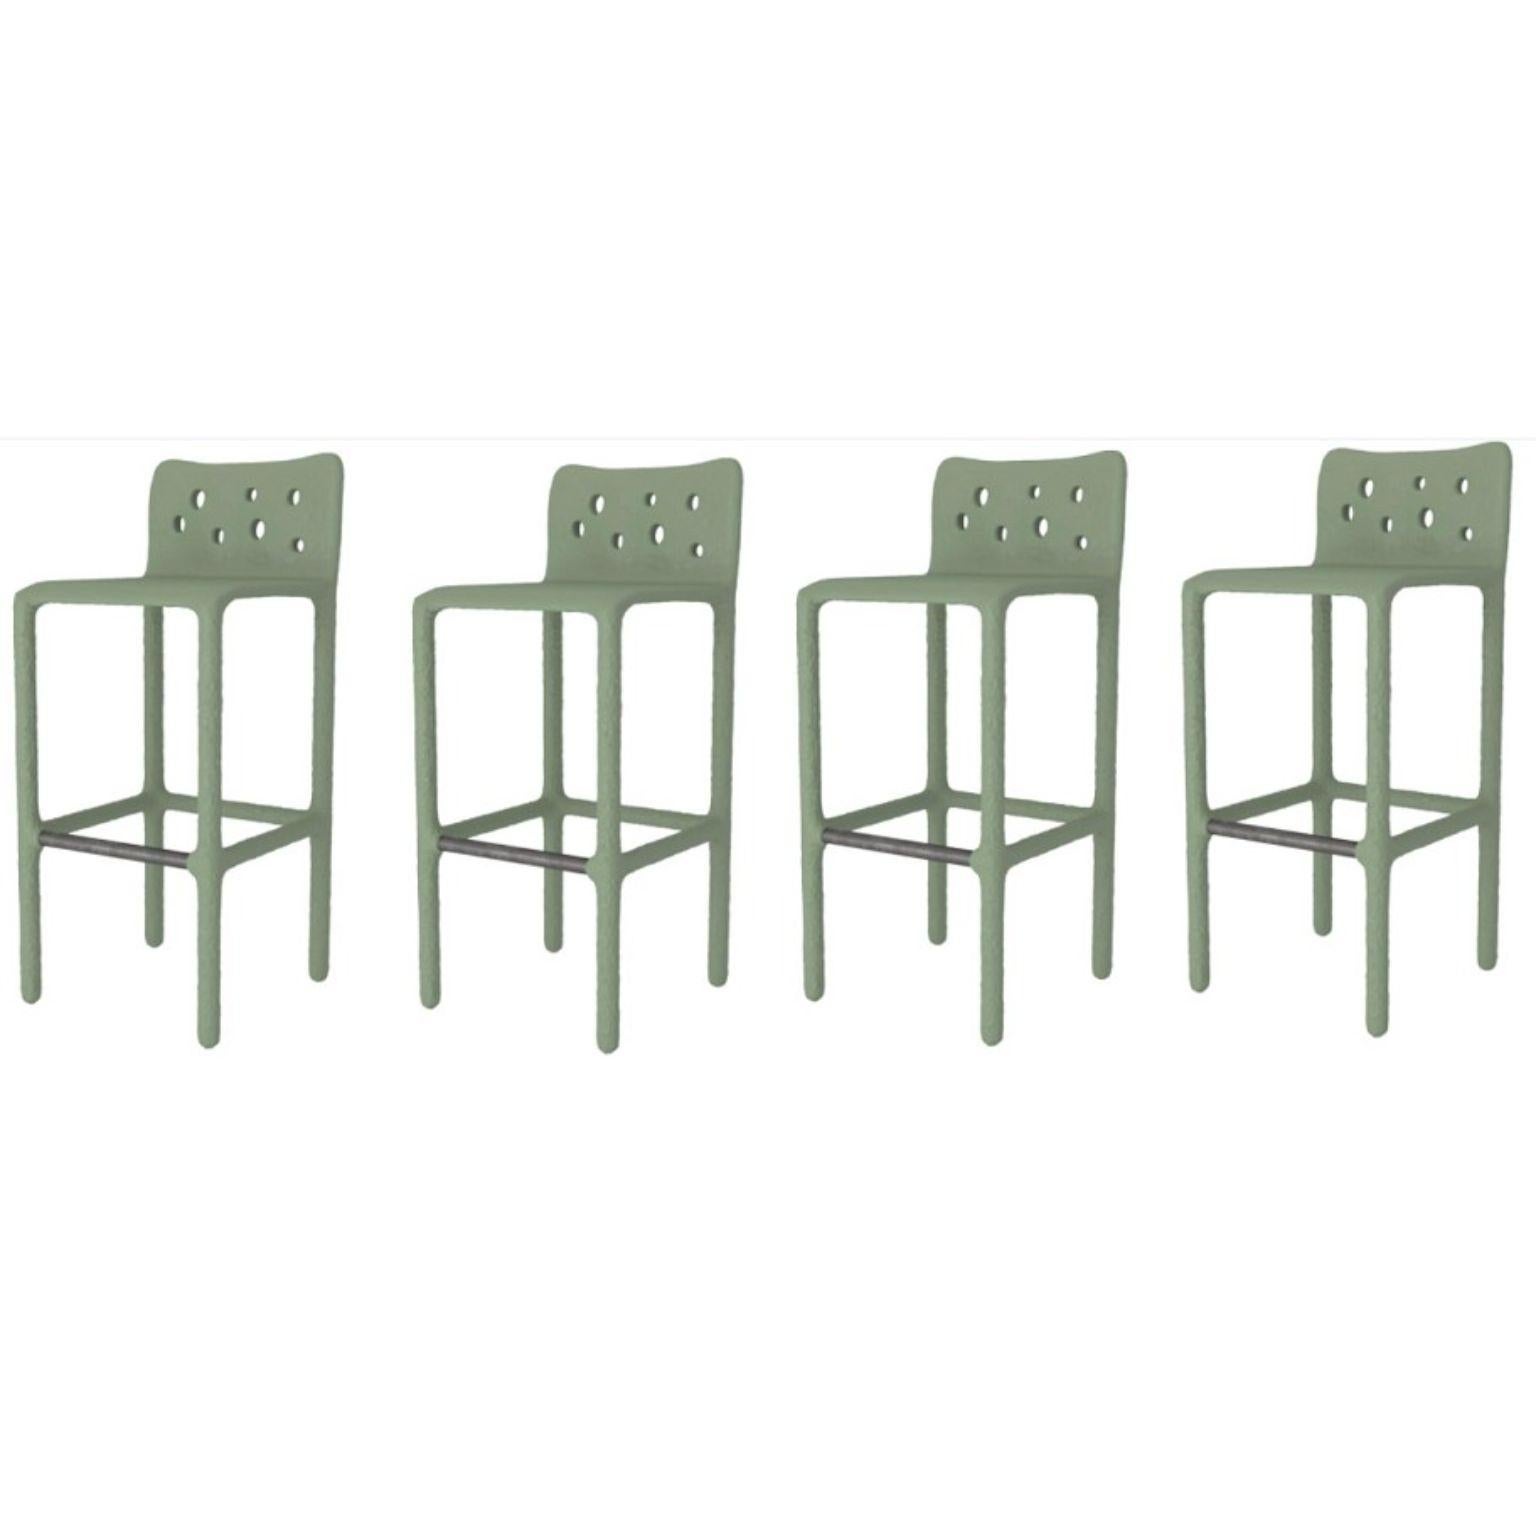 Set of 4 outdoor green sculpted contemporary chairs by Faina.
Design: Victoriya Yakusha.
Material: steel, flax rubber, biopolymer, cellulose.
Dimensions: height: 106 x width: 45 x sitting place width: 49 legs height: 80 cm
Weight: 20 kilos.
Outdoot